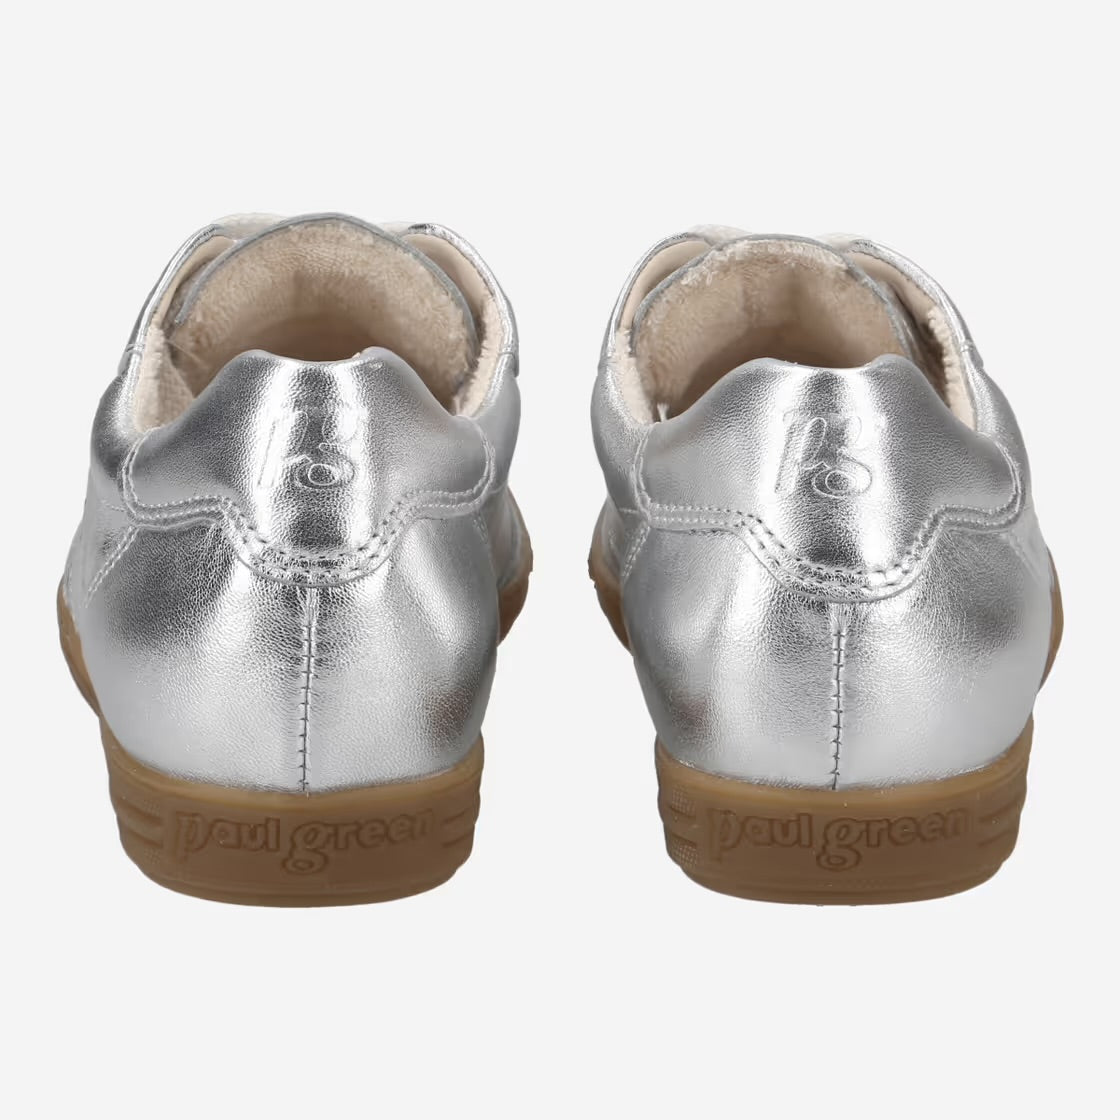 Paul Green - 5350 Silver Trainer [Standard Fit]